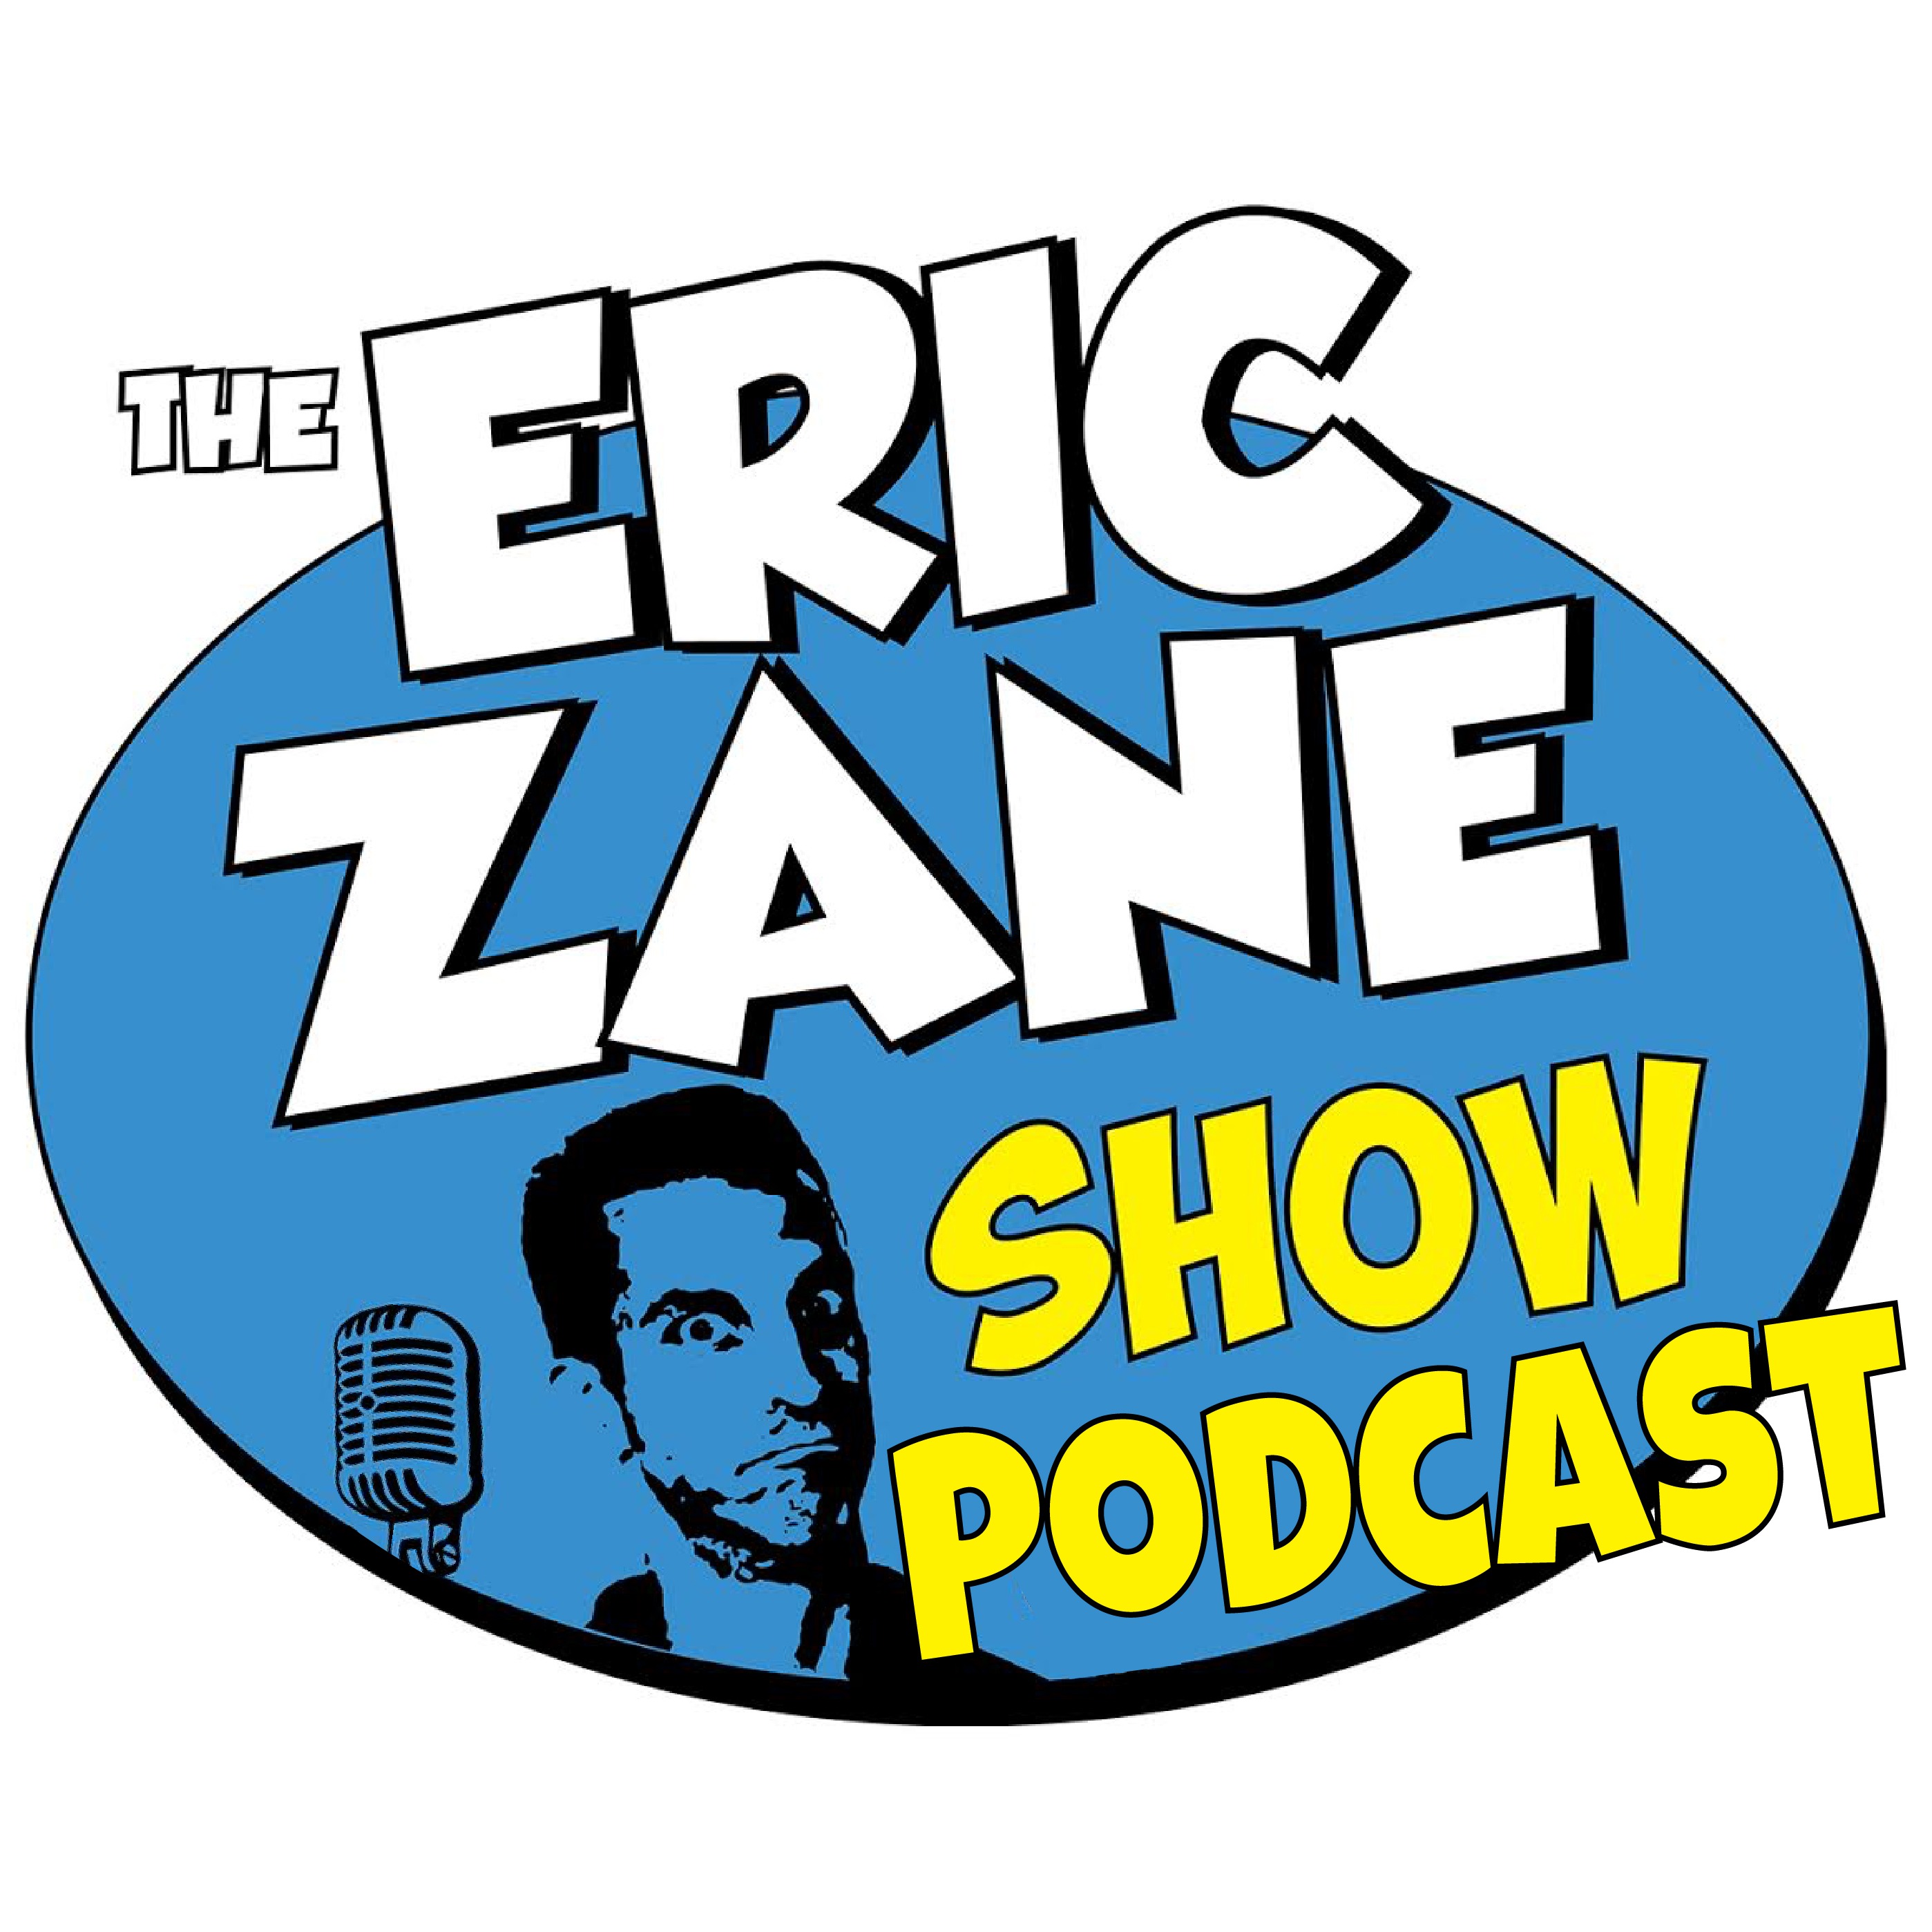 Eric Zane Show Podcast 971 - Southwest Airlines is the world's worst.